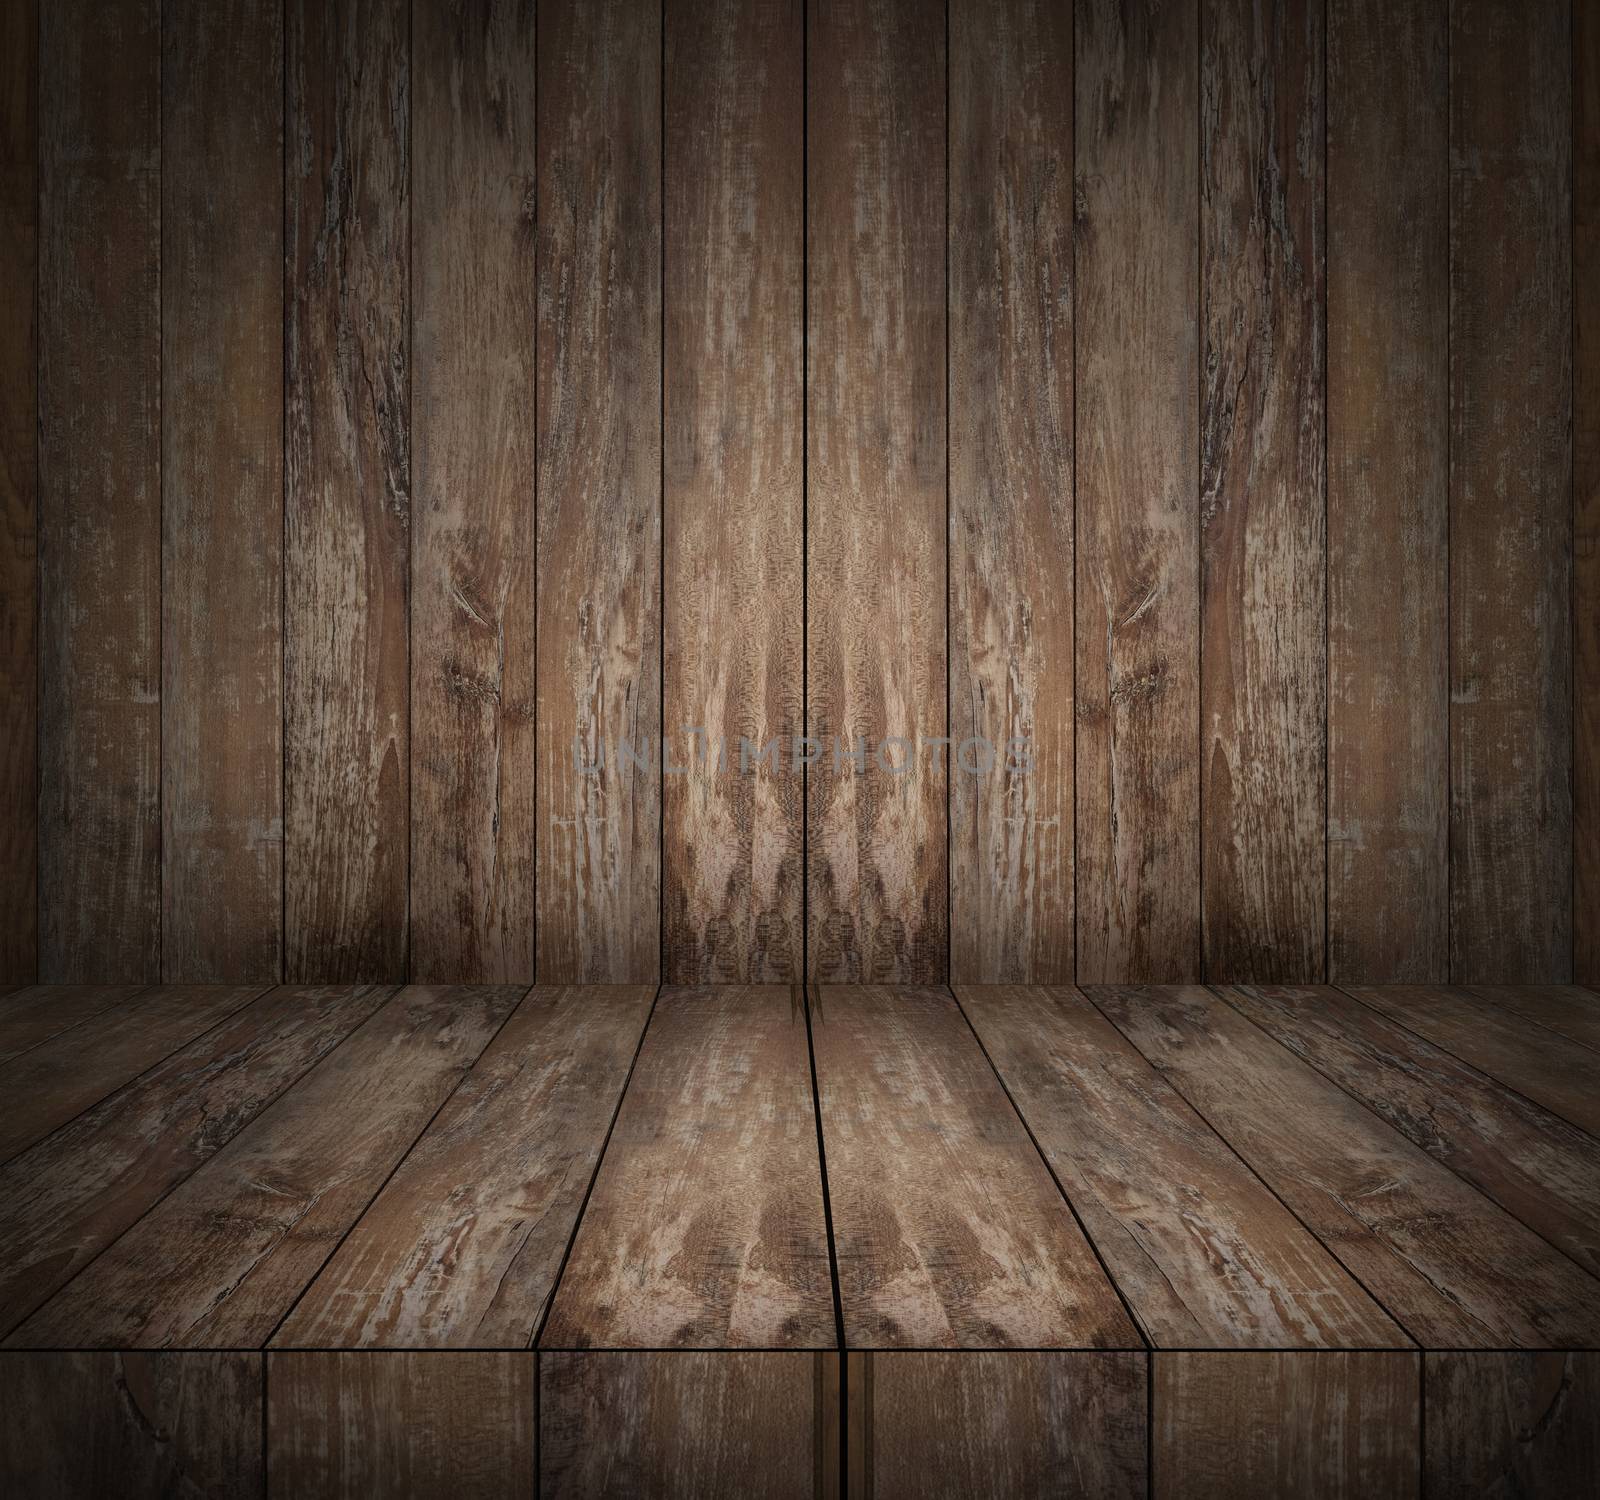 background and texture concept - wooden floor and wall